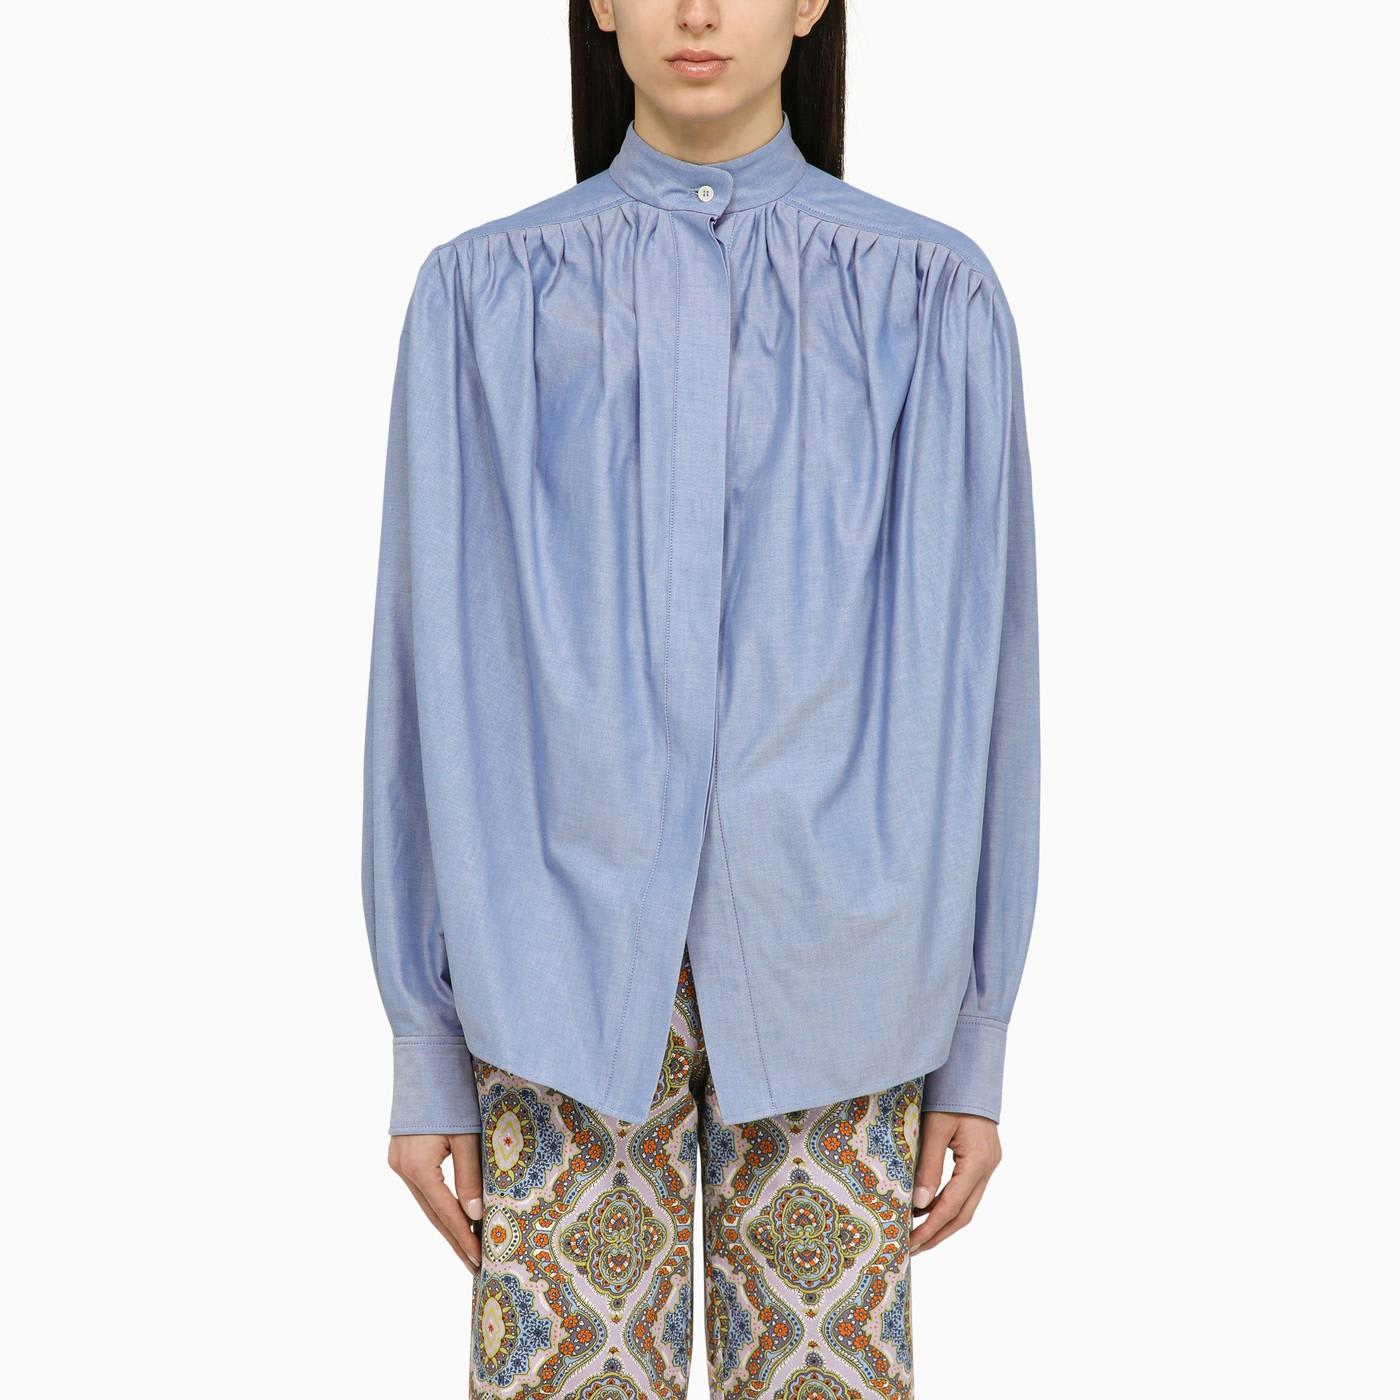 Light Blue Cotton Blouse With Ruffled Pattern